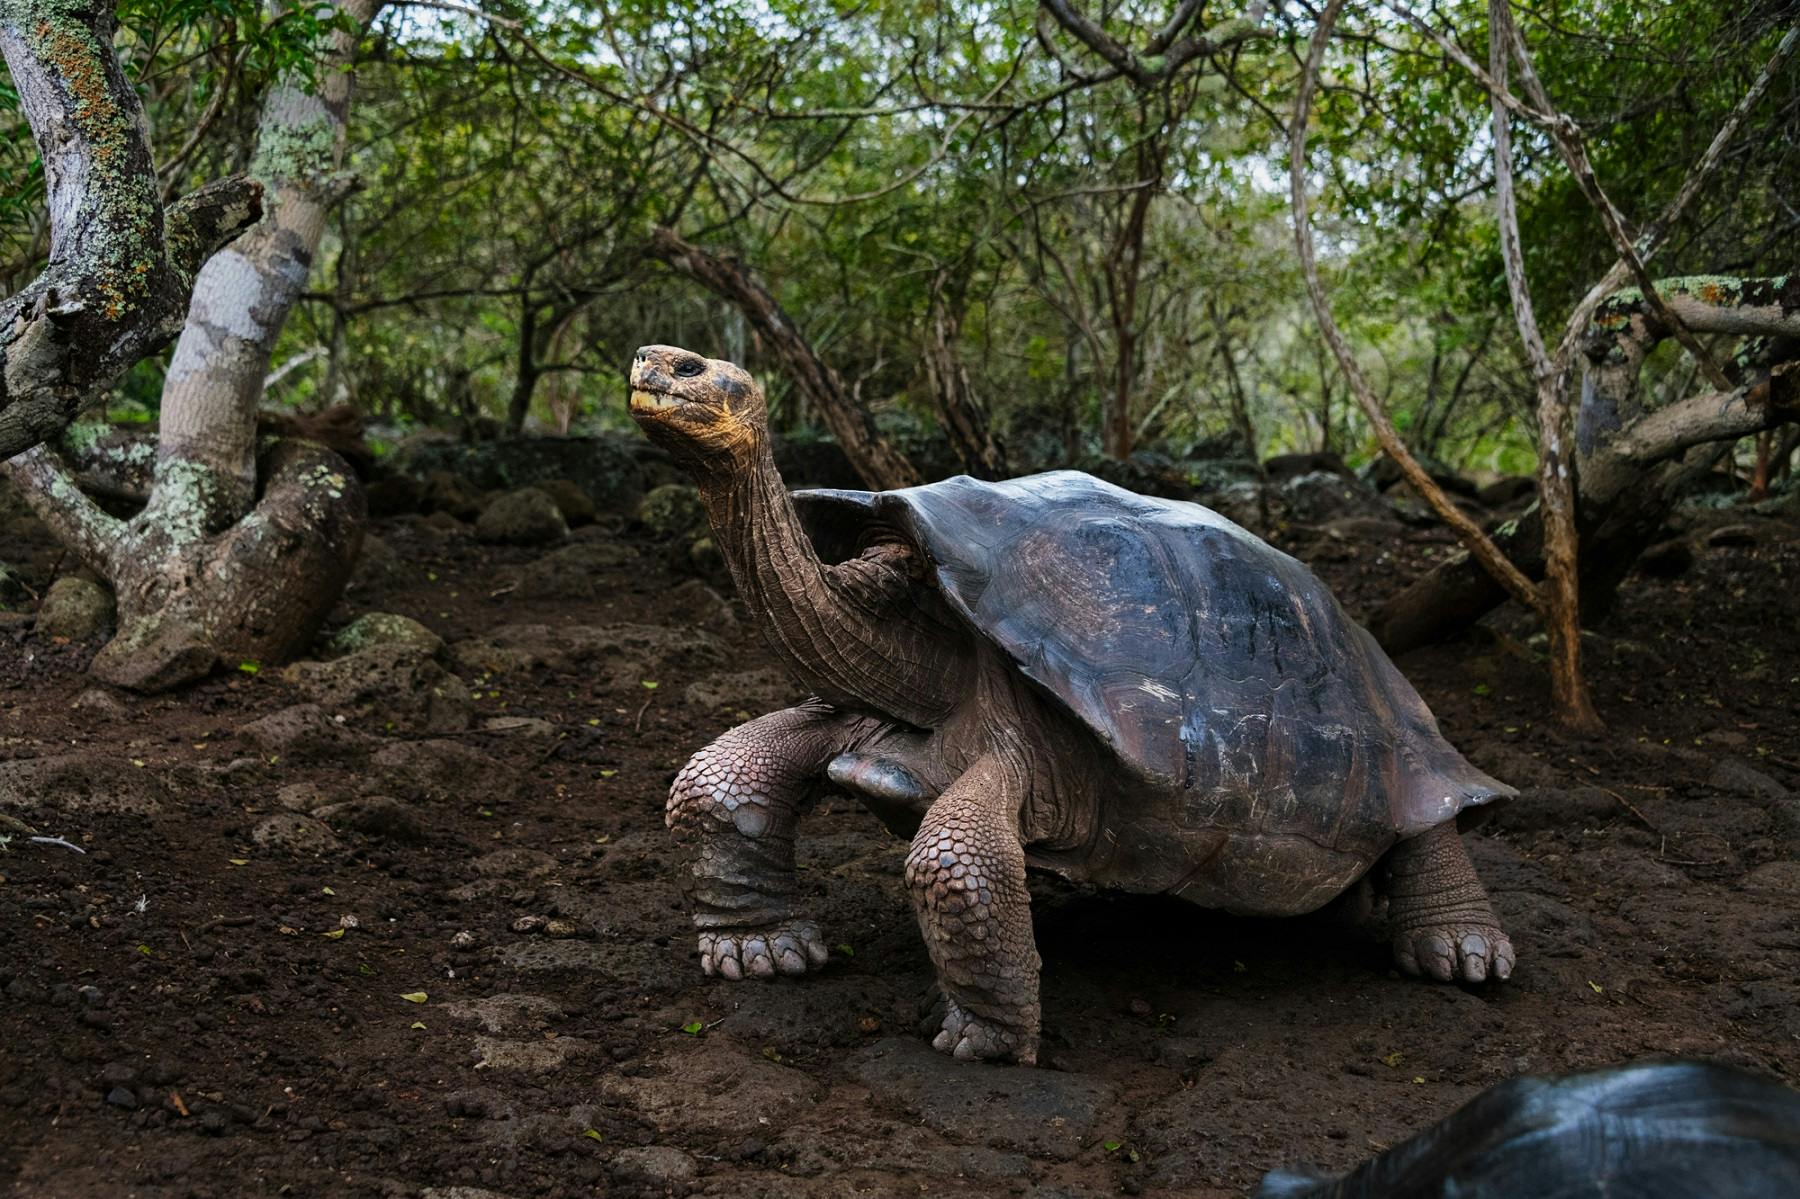 the Galapagos Islands by Steve McCurry